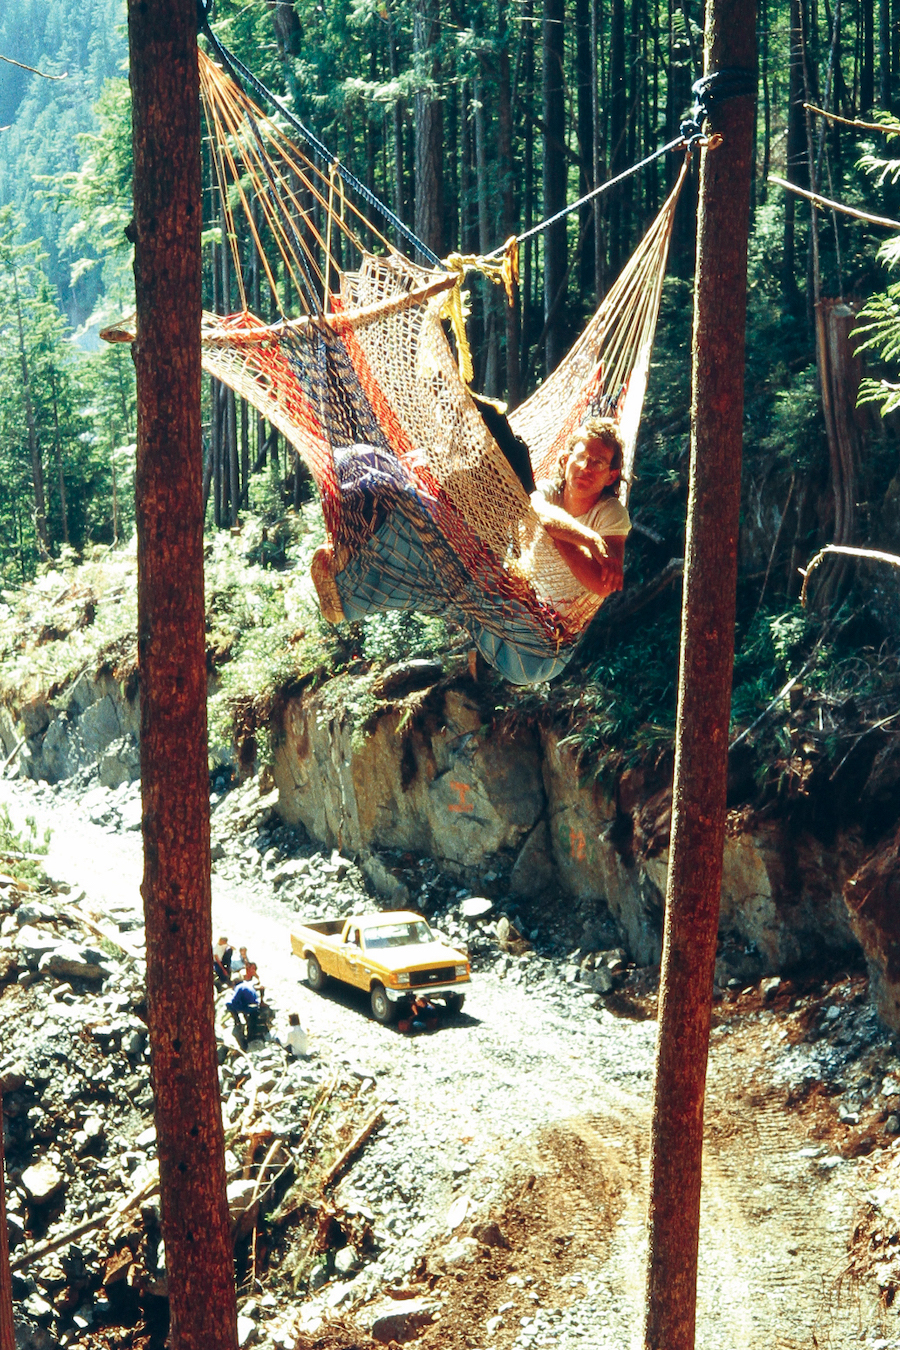 Paul Winstanely in hammock at Sulphur Pass, '88 | Photo courtesy of Clayoquot Action